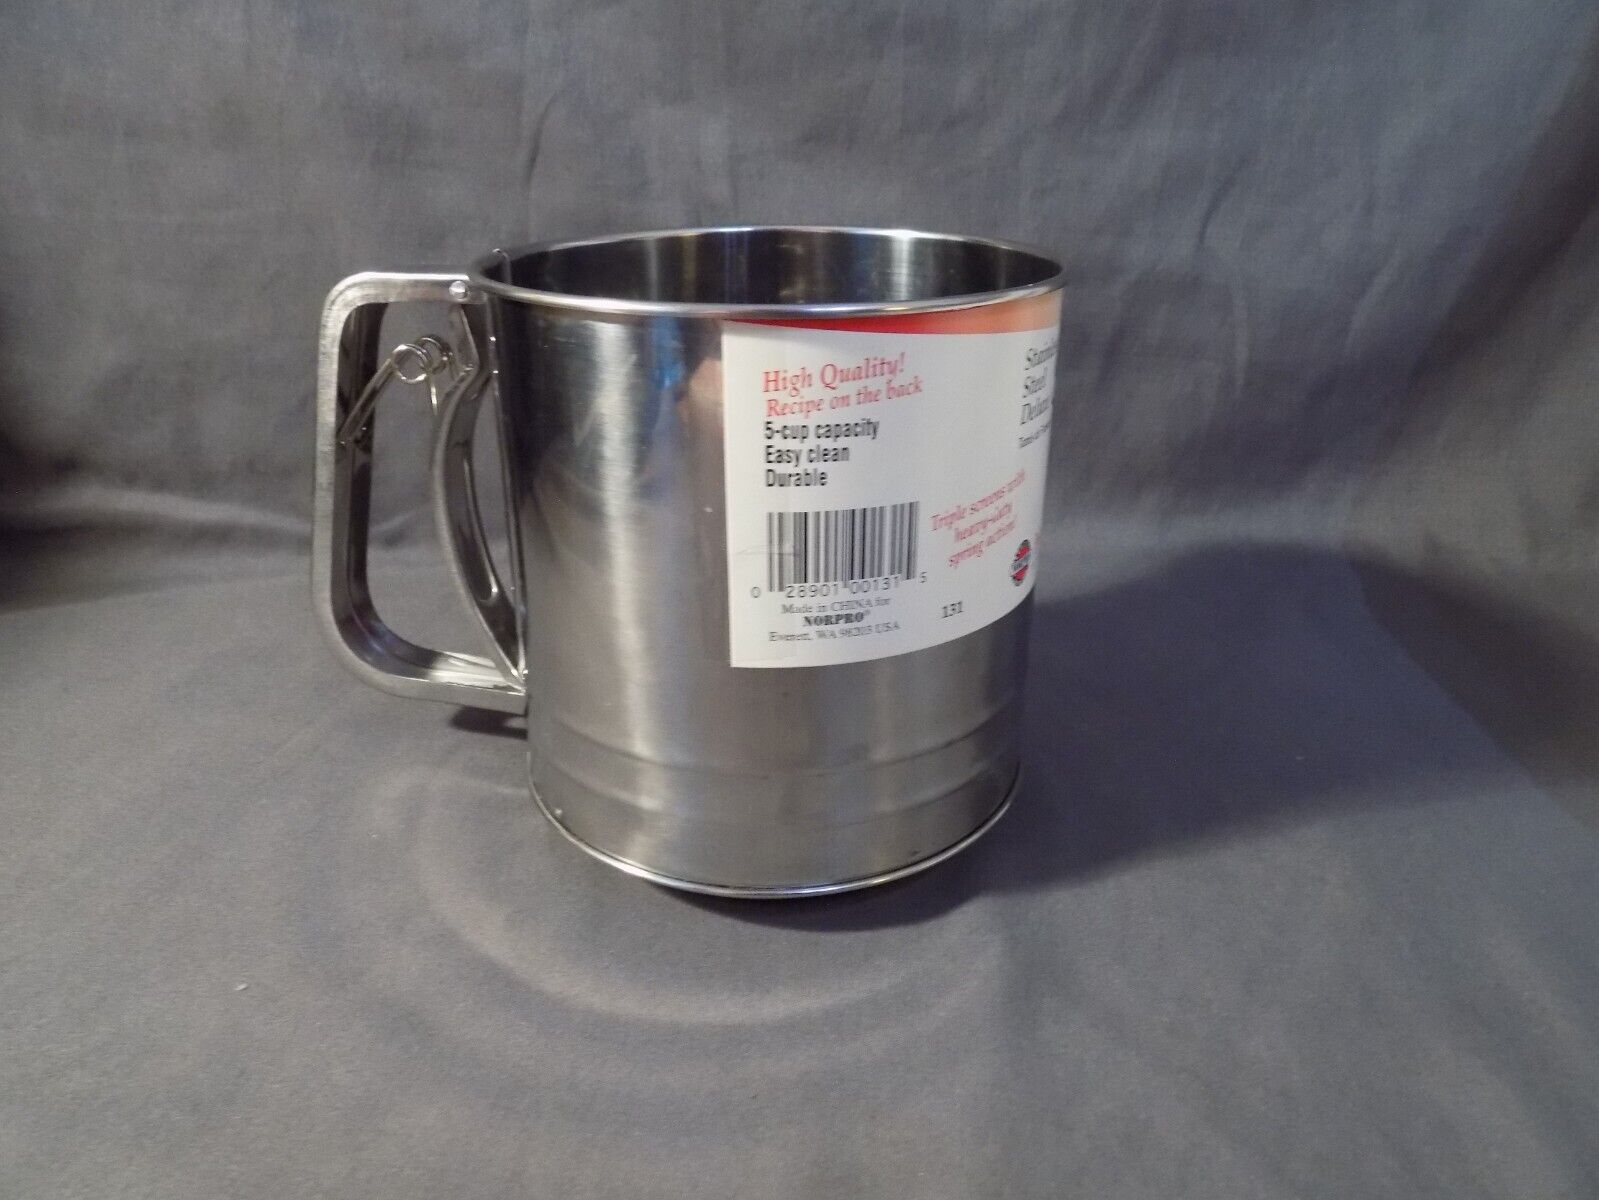 Vintage Norpro 5 cup Stainless Steel Deluxe Sifter